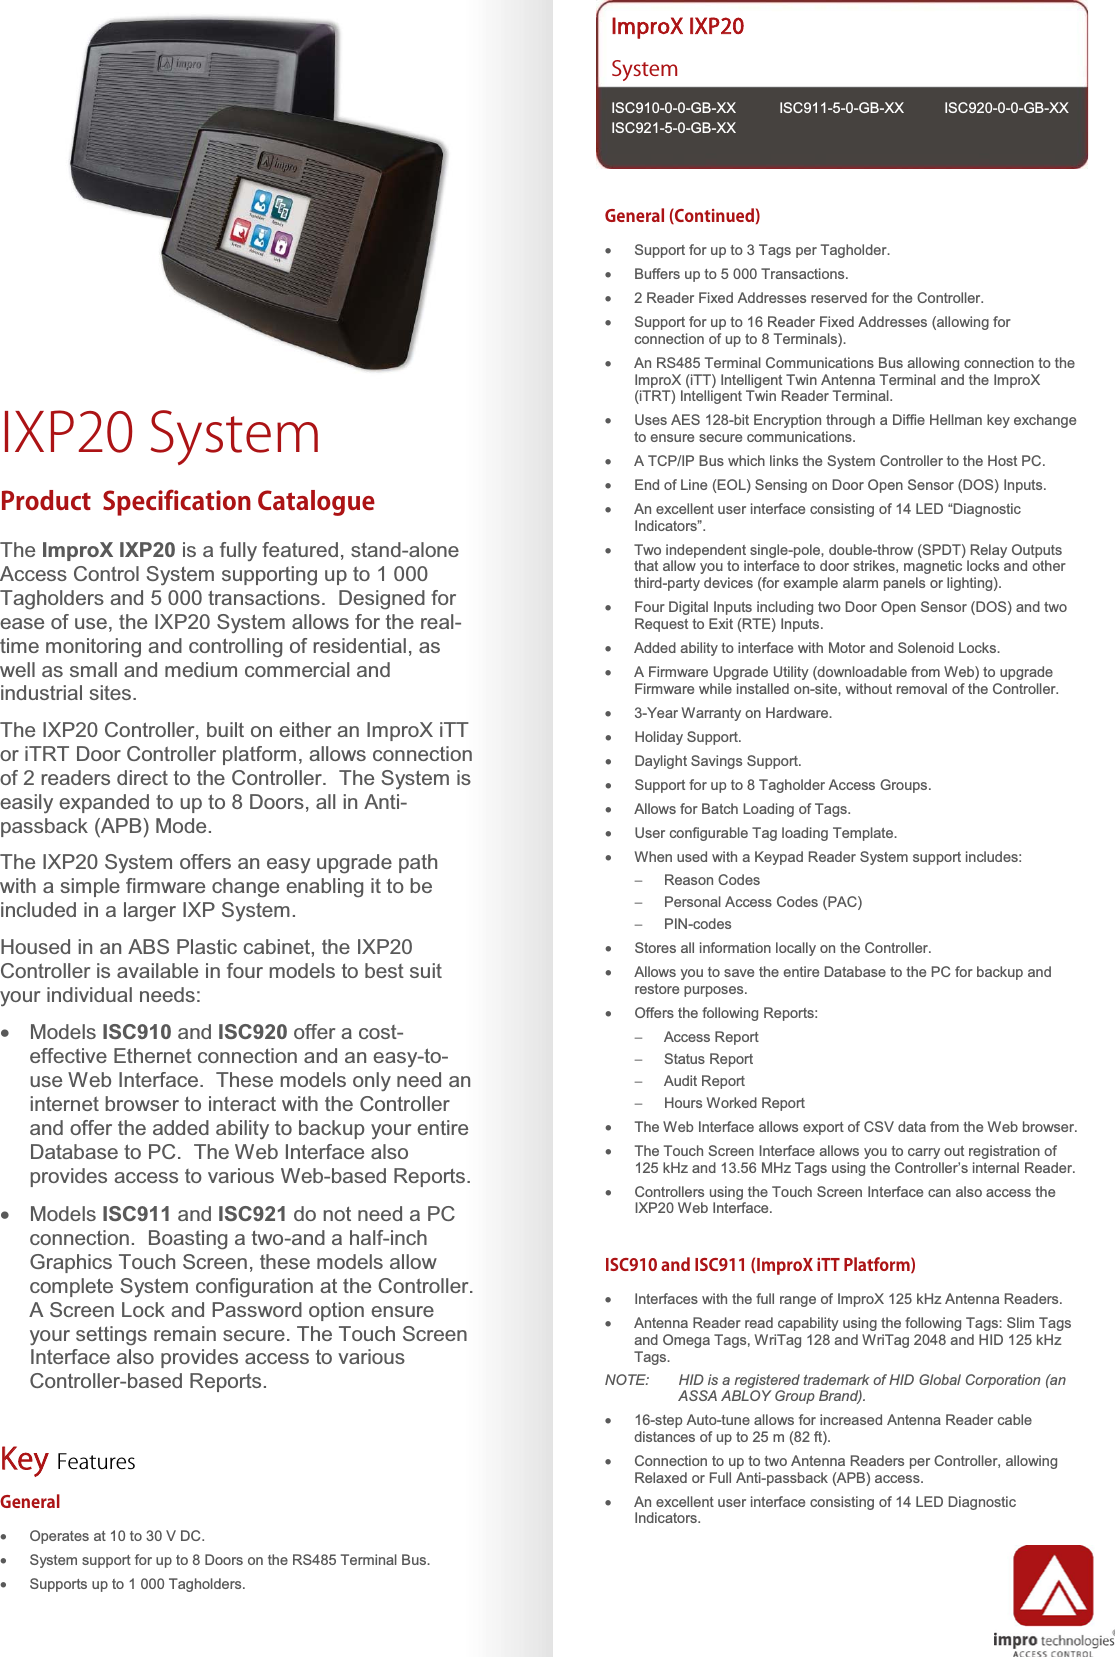 Page 1 of 6 - ImproX IXP20 System Specification